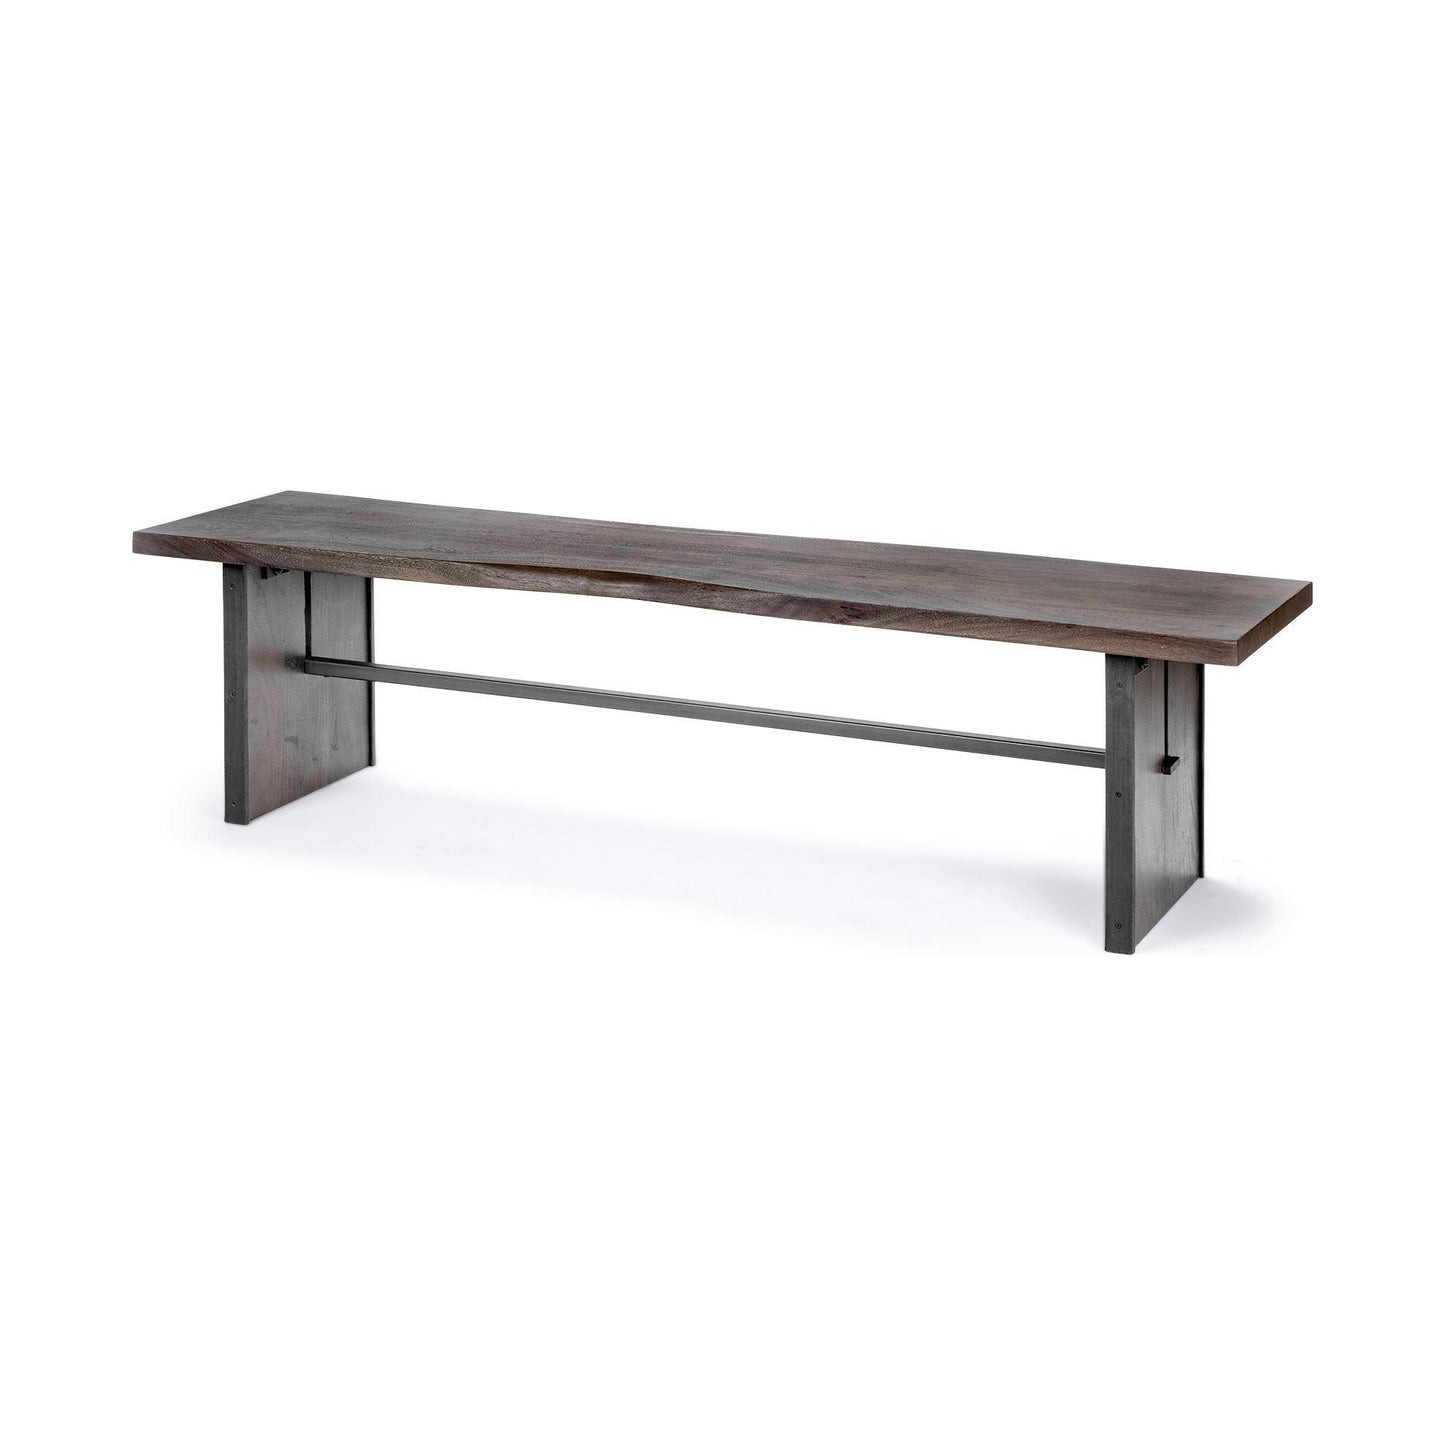 Ledger I 70L x 17W Brown Live-Edge Wooden Dining Bench